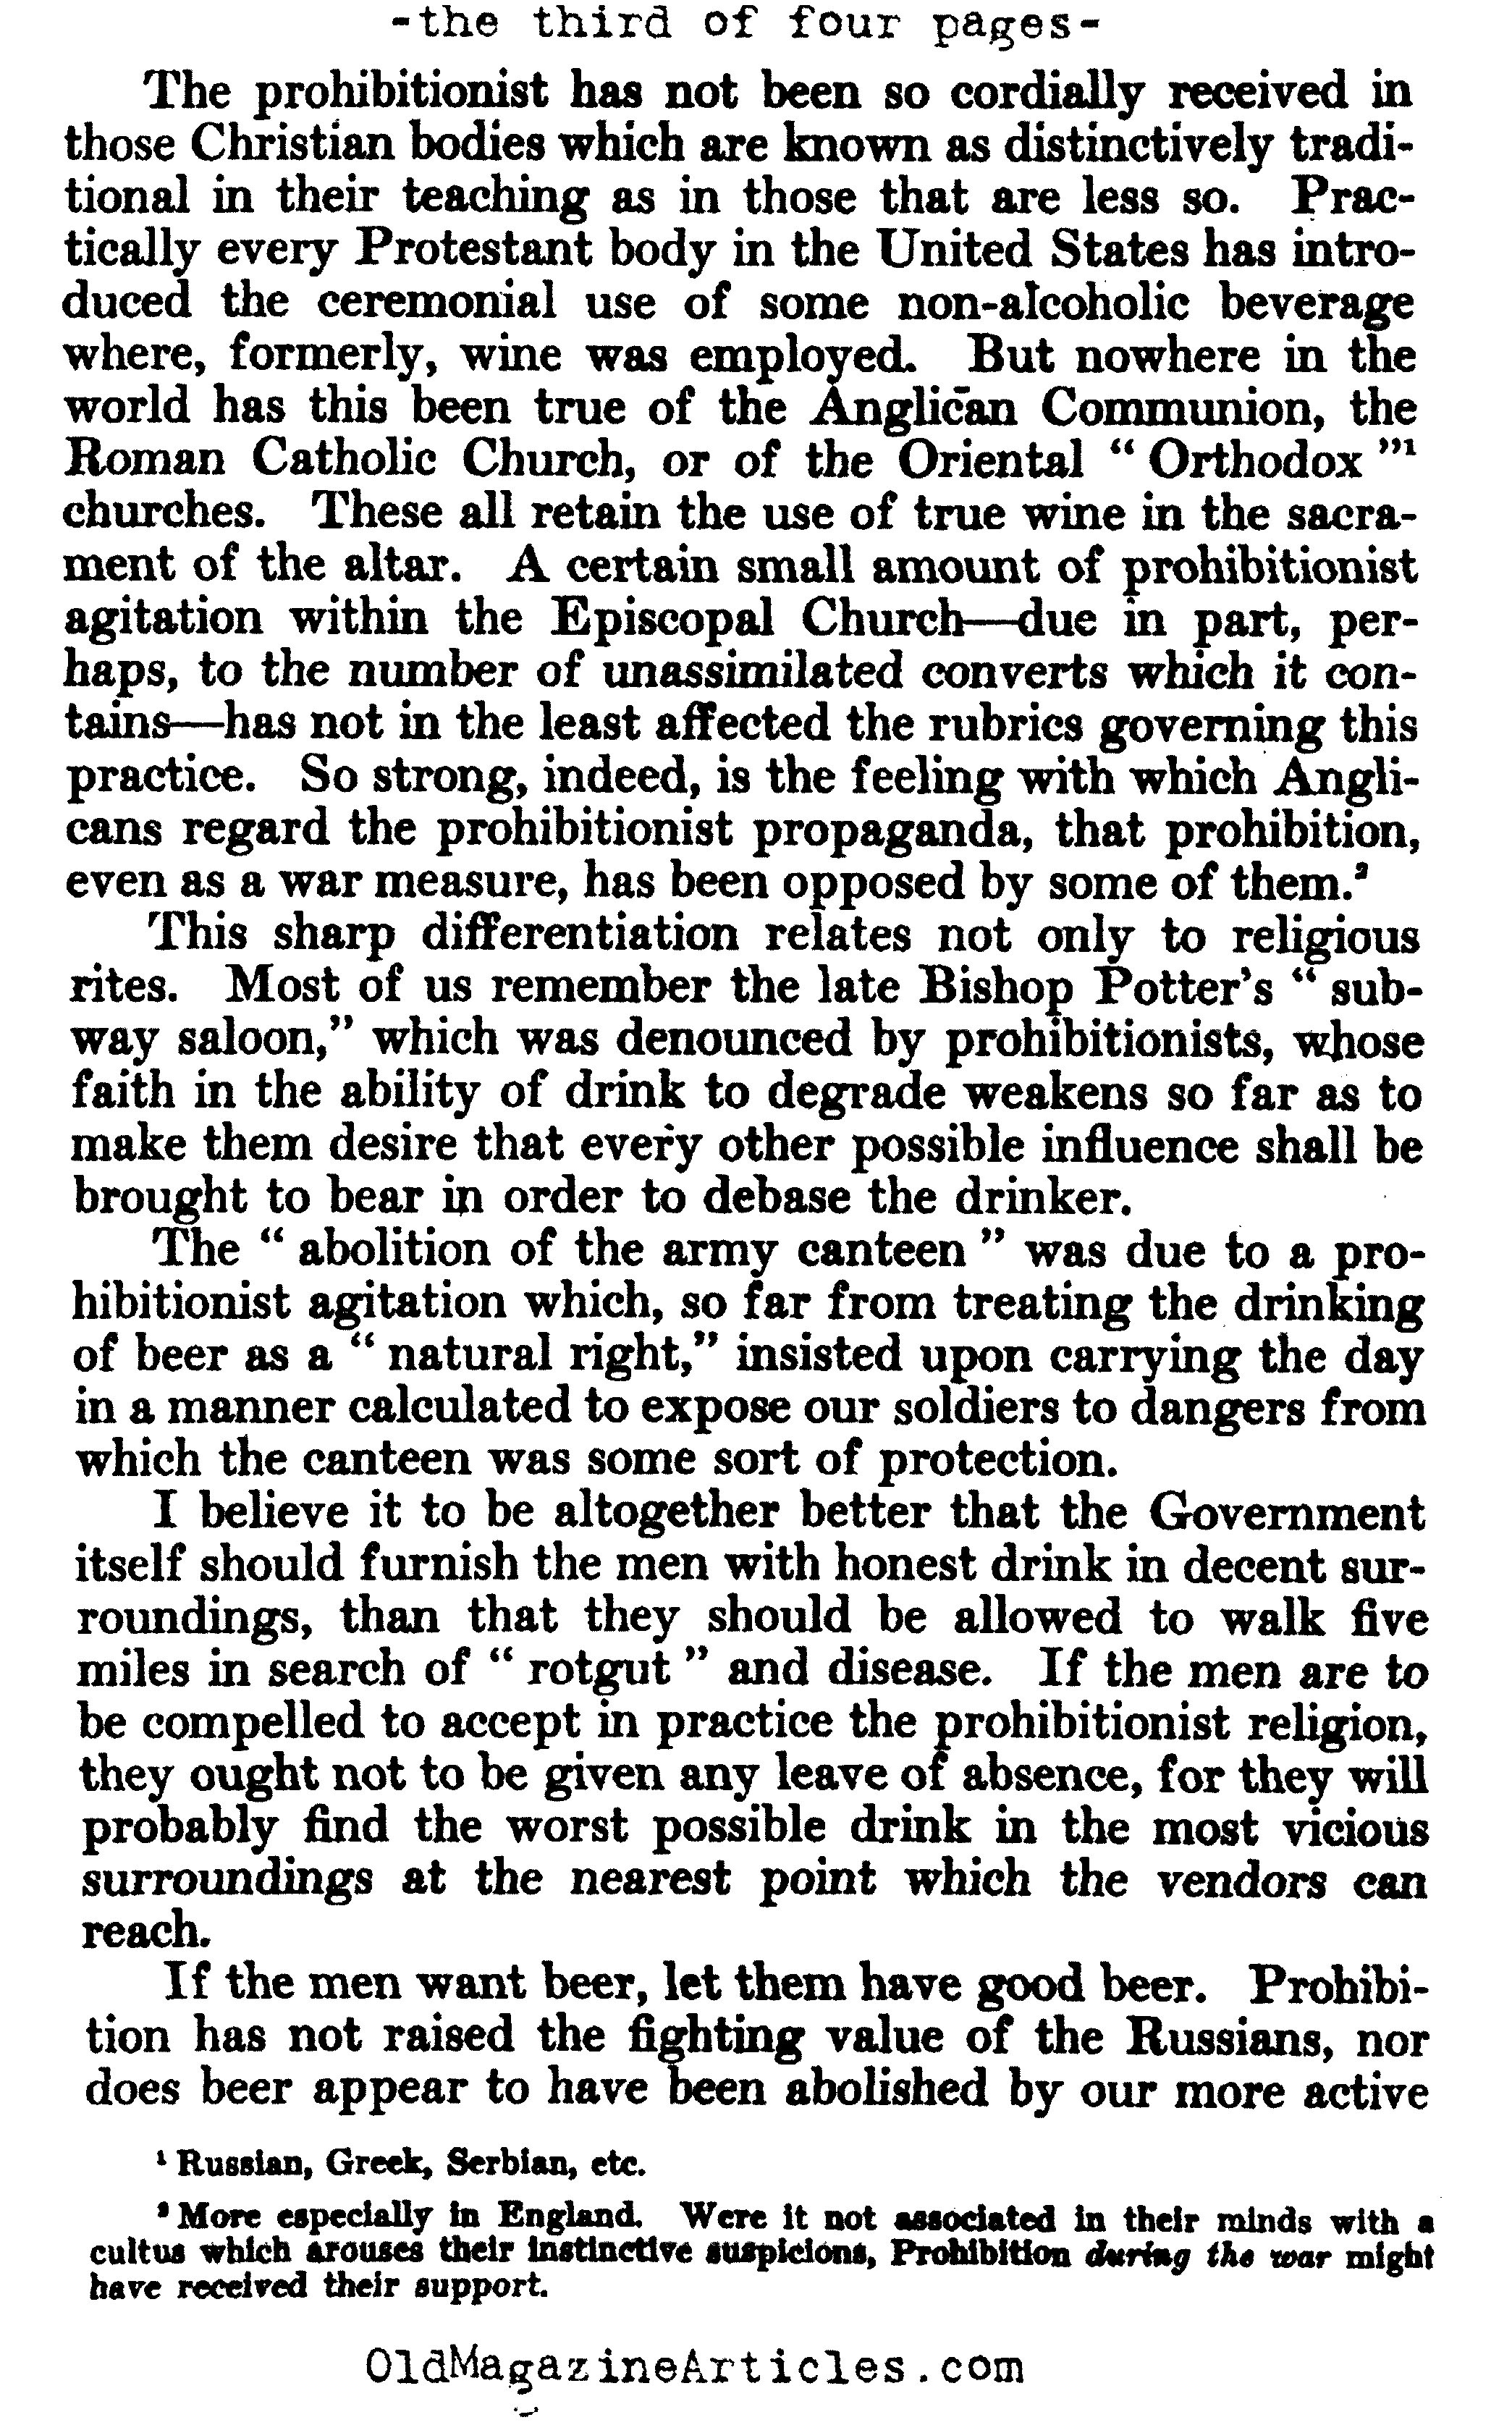 Christianity  Versus  Prohibition (The North American Review, 1918)